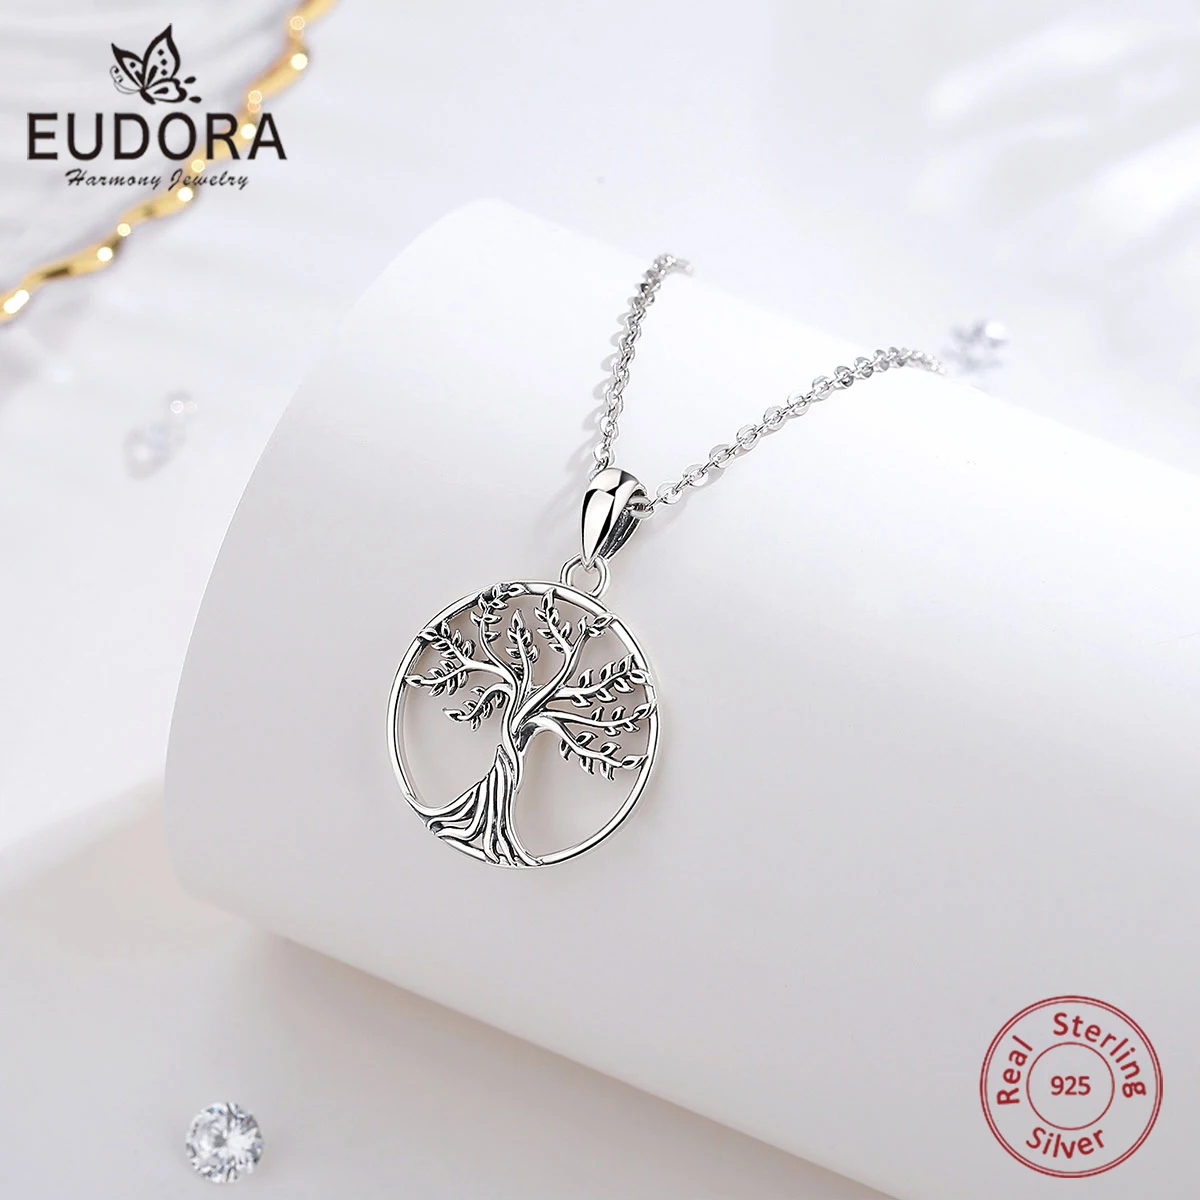 

Eudora 925 Sterling Silver Necklace Hot Tree of Life Round Pendant Necklaces Bijoux Collier Elegant Women Girl Jewelry Gifts 765